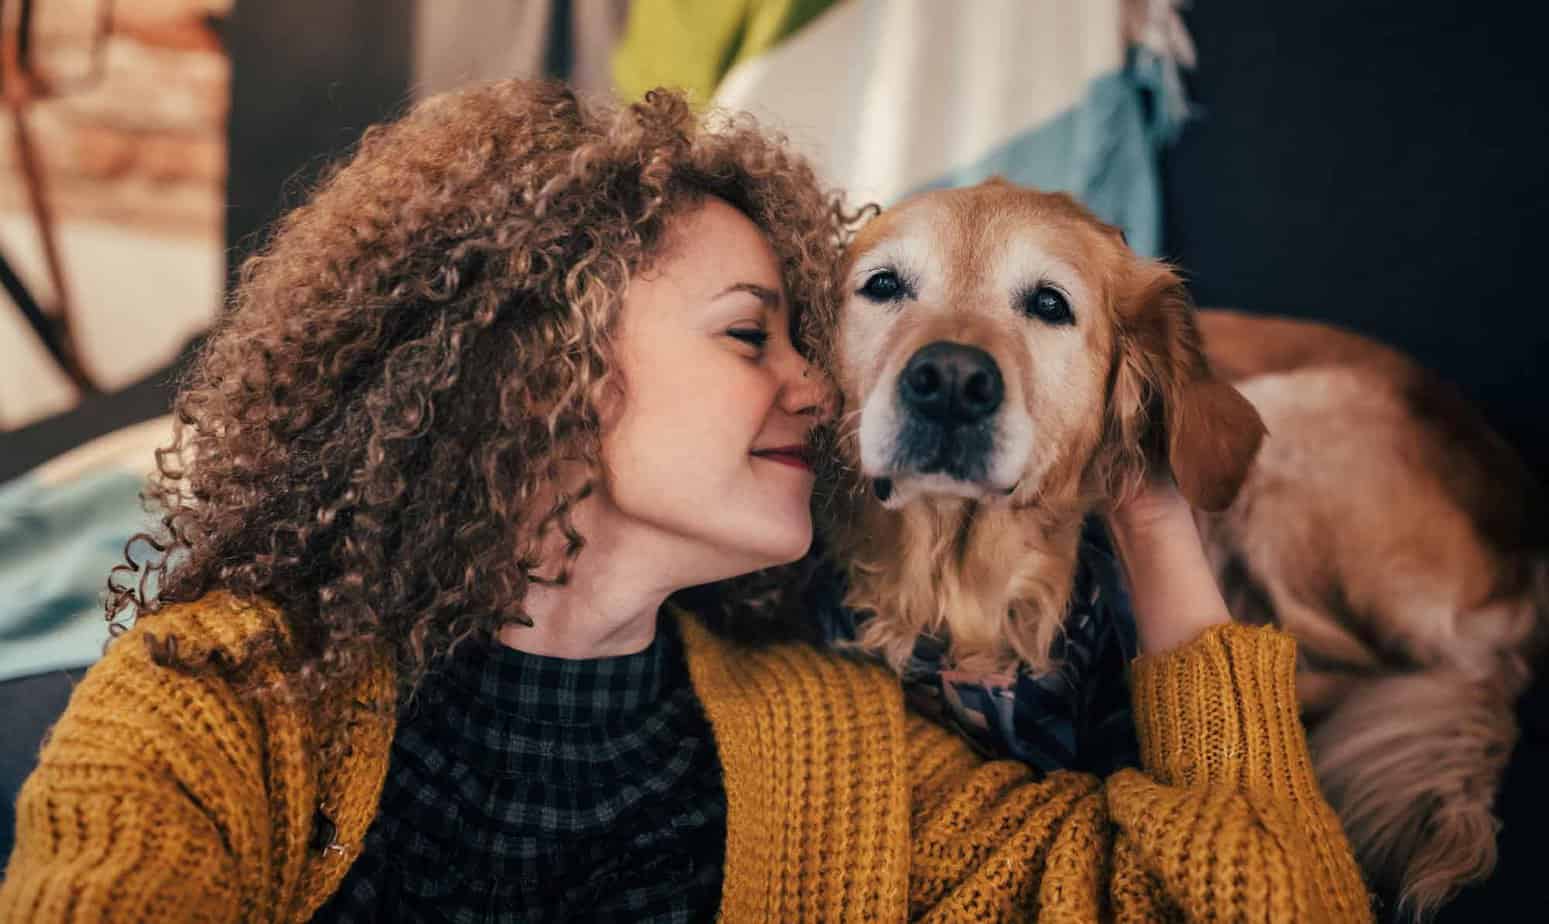 woman in recovery hugging golden retriever dog and smiling